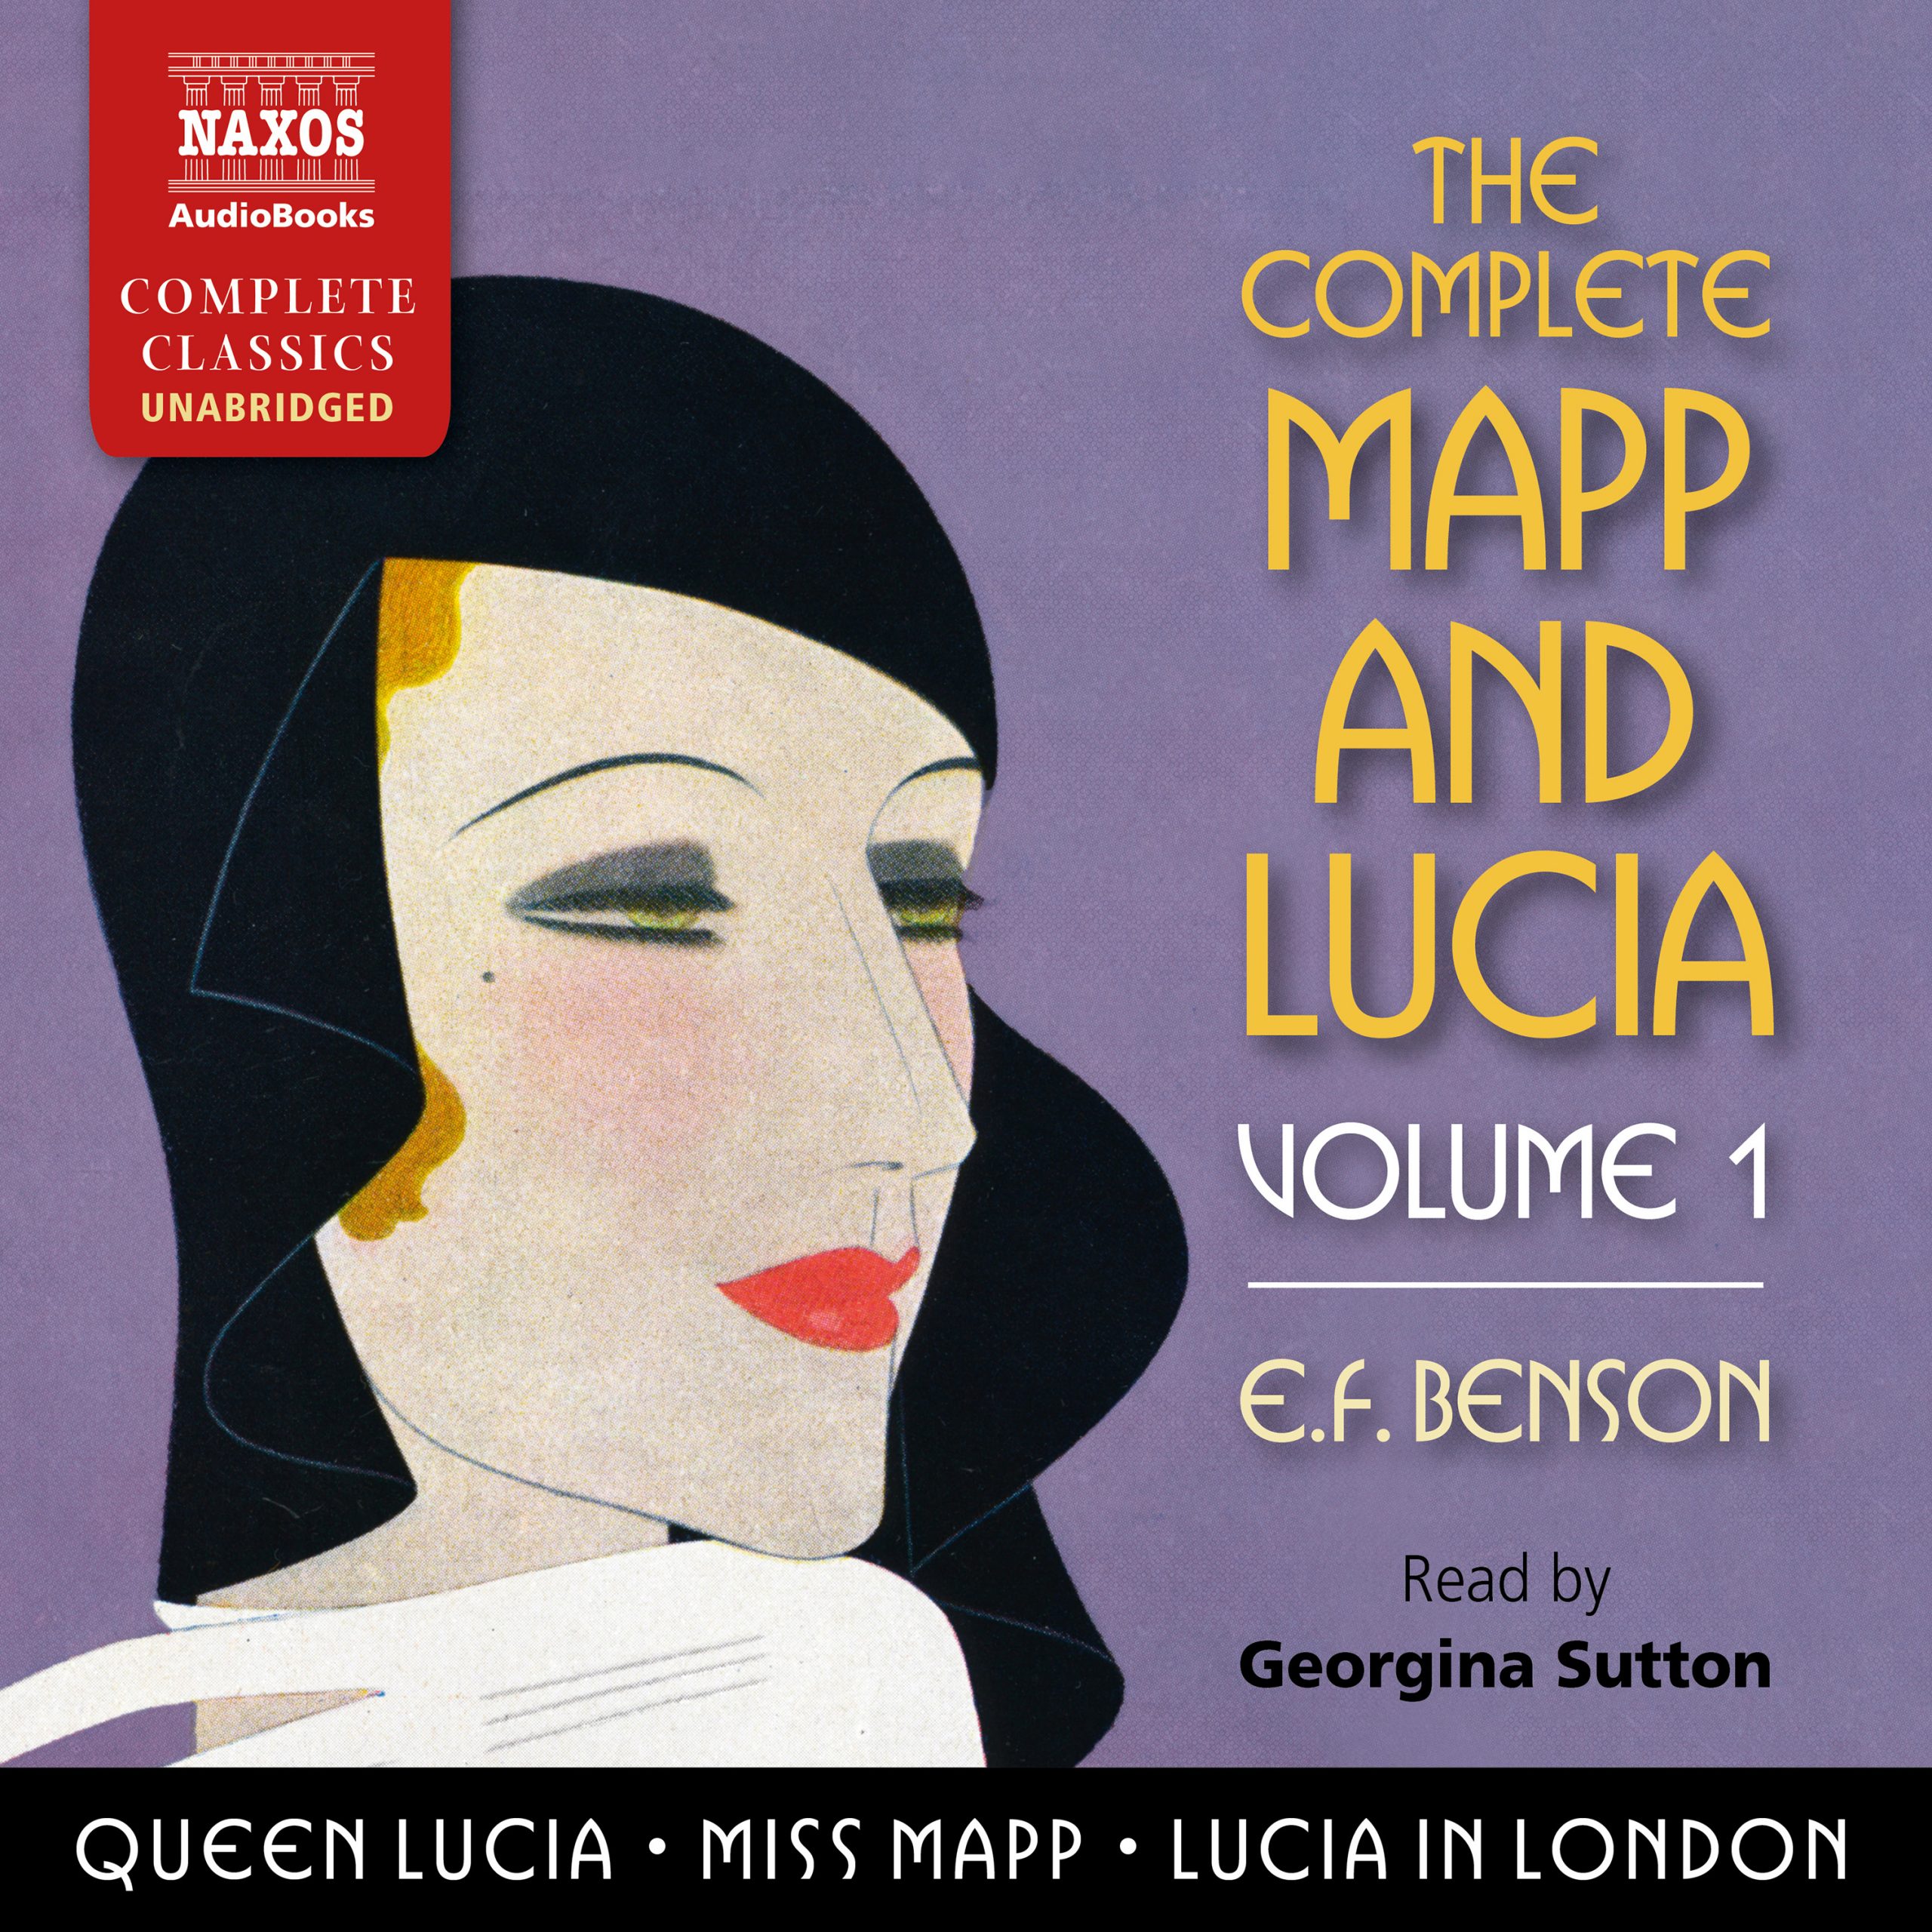 The Complete Mapp and Lucia, Volume 1 (unabridged)